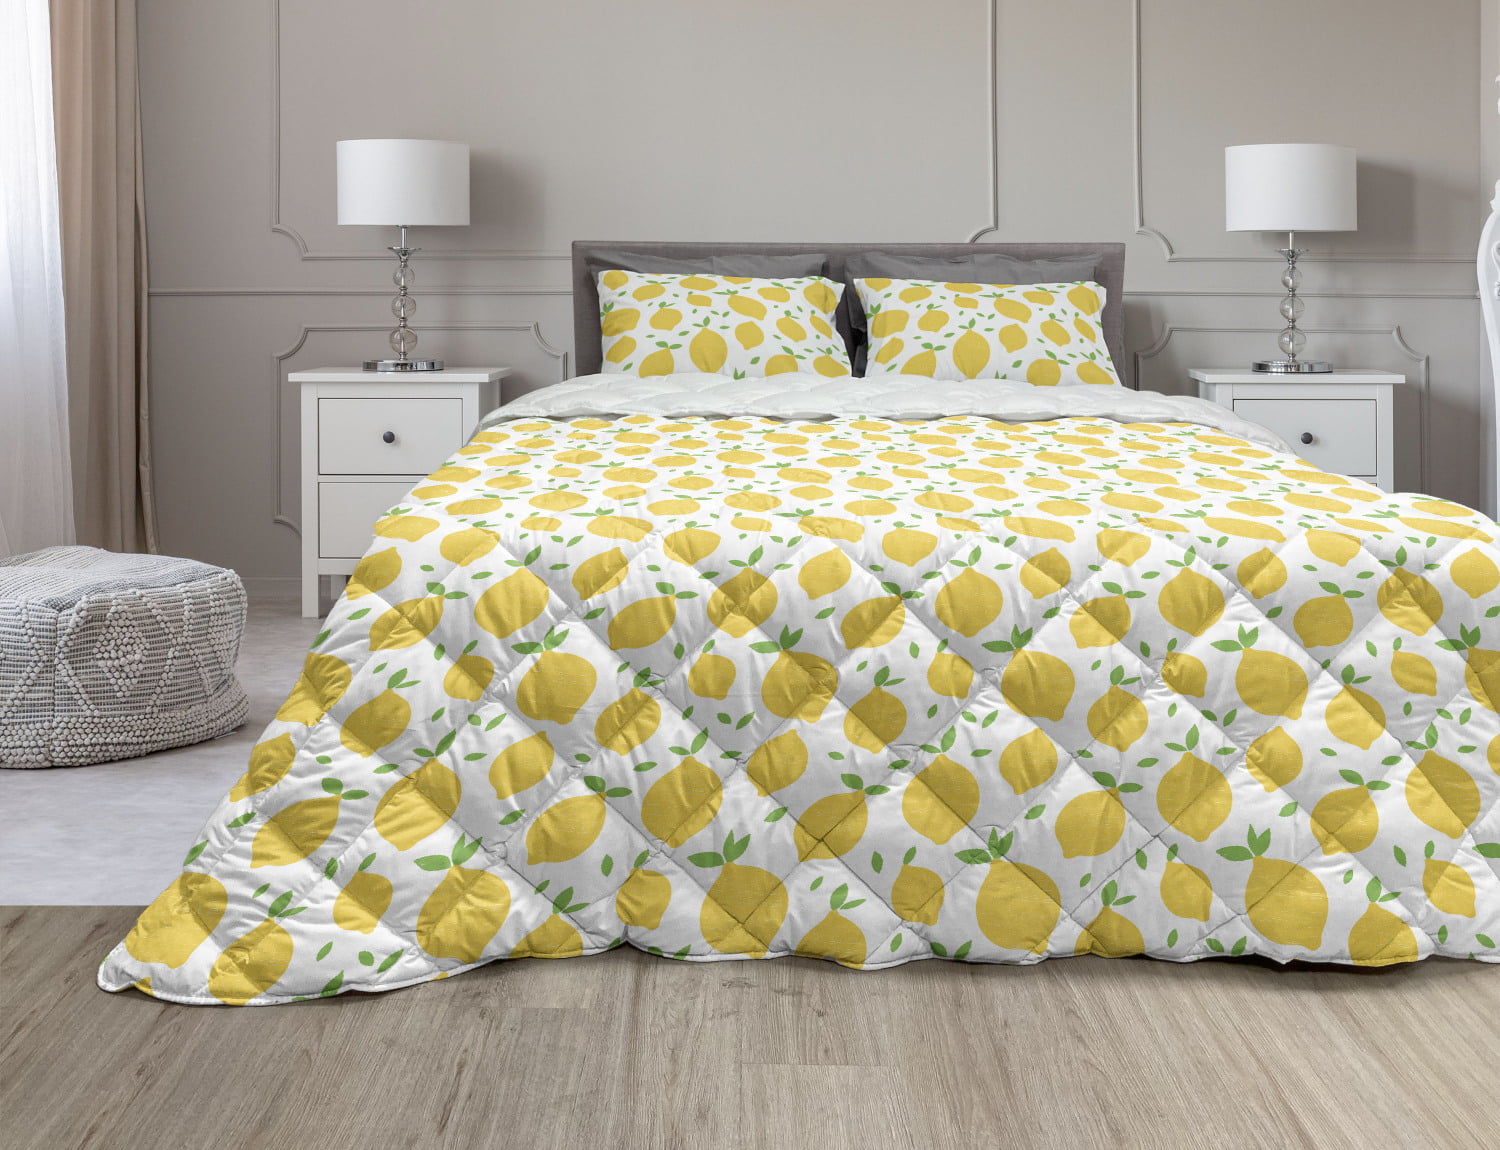 Twin 59x 78,Lemon CH&Q Lemon Printed Quilt Comforter,Cute Cozy Lightweight Cotton Blanket Twin,Soft Warm Throw Blanket for Bed,Couch & Sofa,Bedding Coverlet 